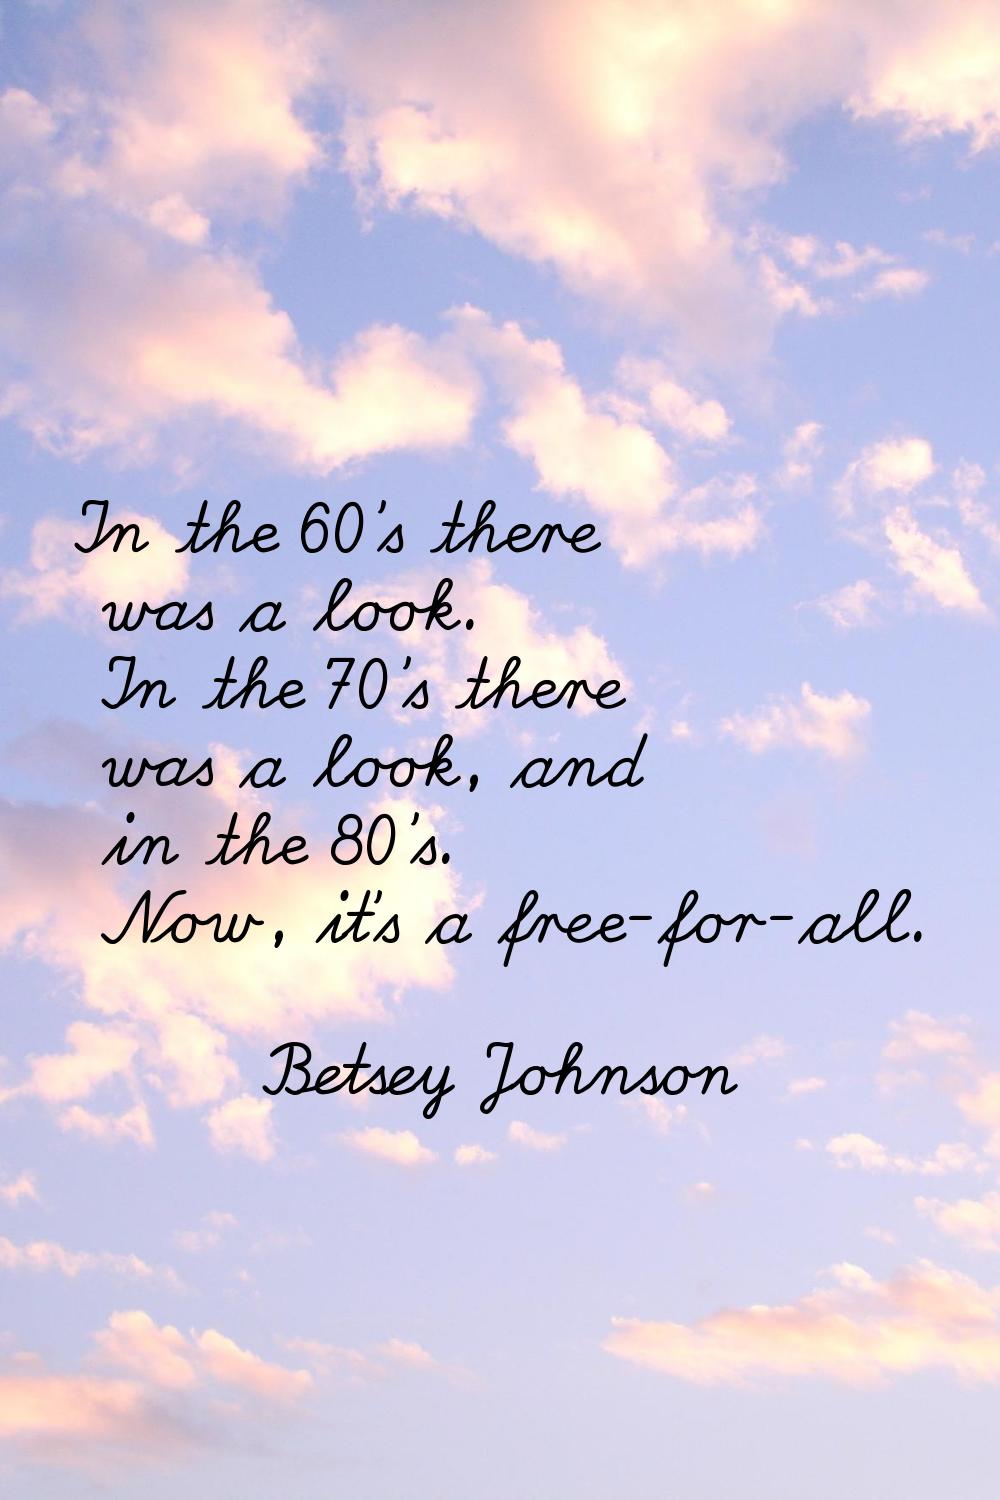 In the 60's there was a look. In the 70's there was a look, and in the 80's. Now, it's a free-for-a